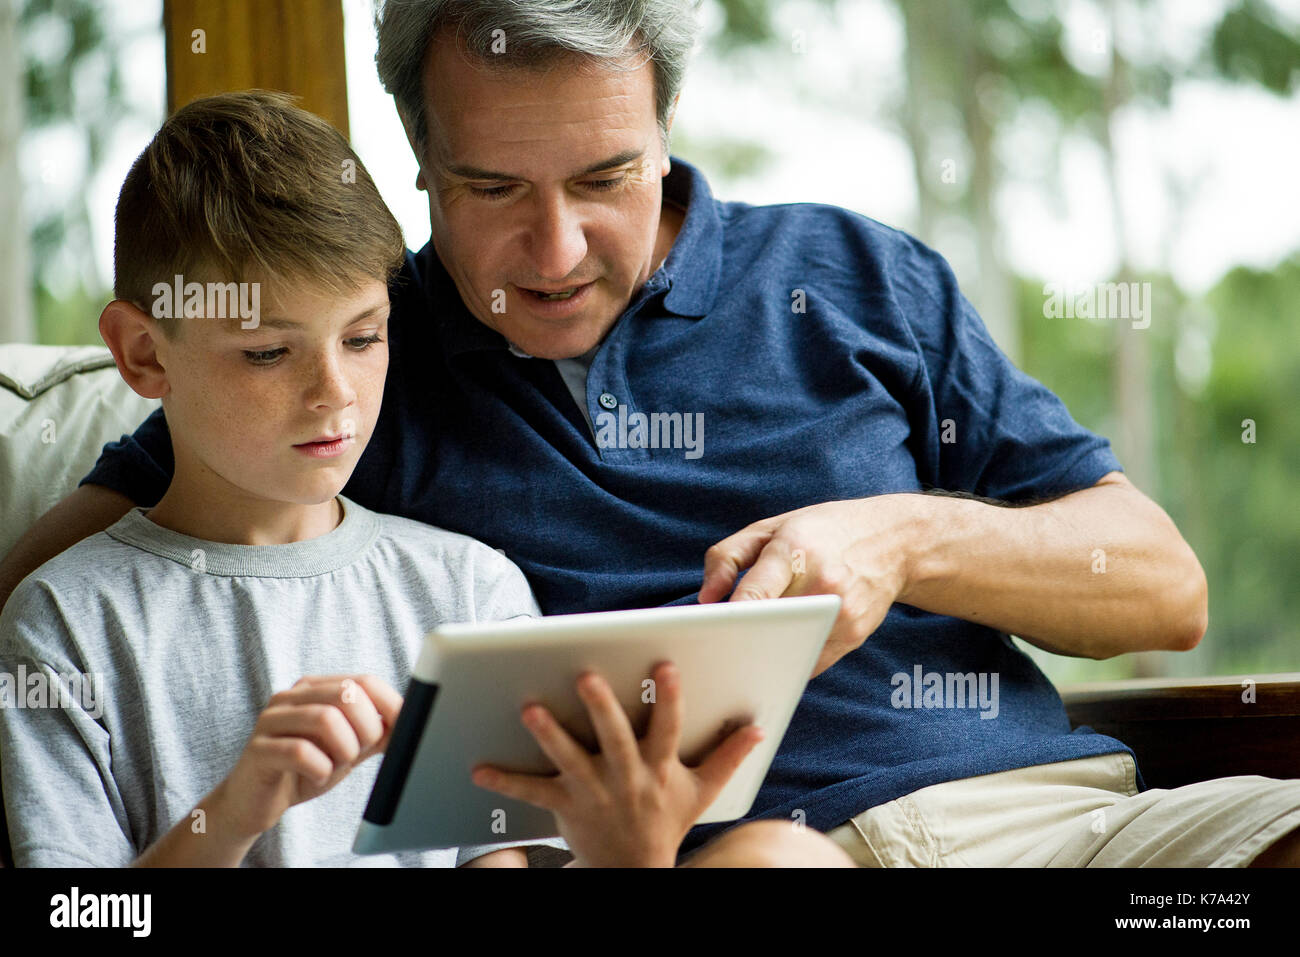 Man with child using digital tablet Stock Photo